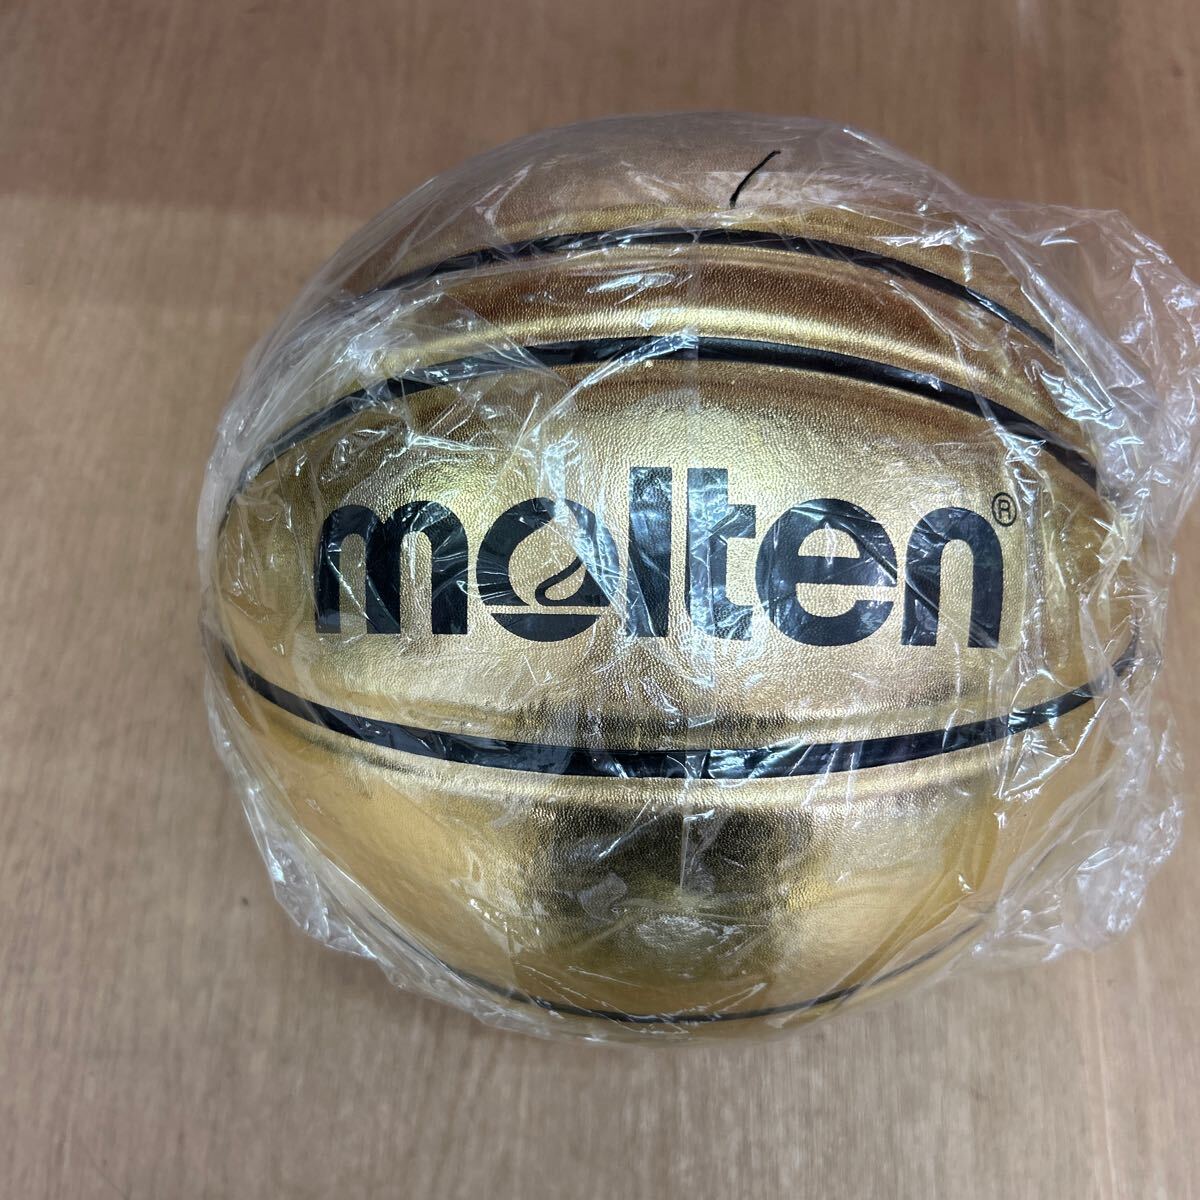  unopened goods moltenmoru ton Gold basketball gong ngon fly zB1.. memory 2020*4.24 BG-SL7 case attaching 